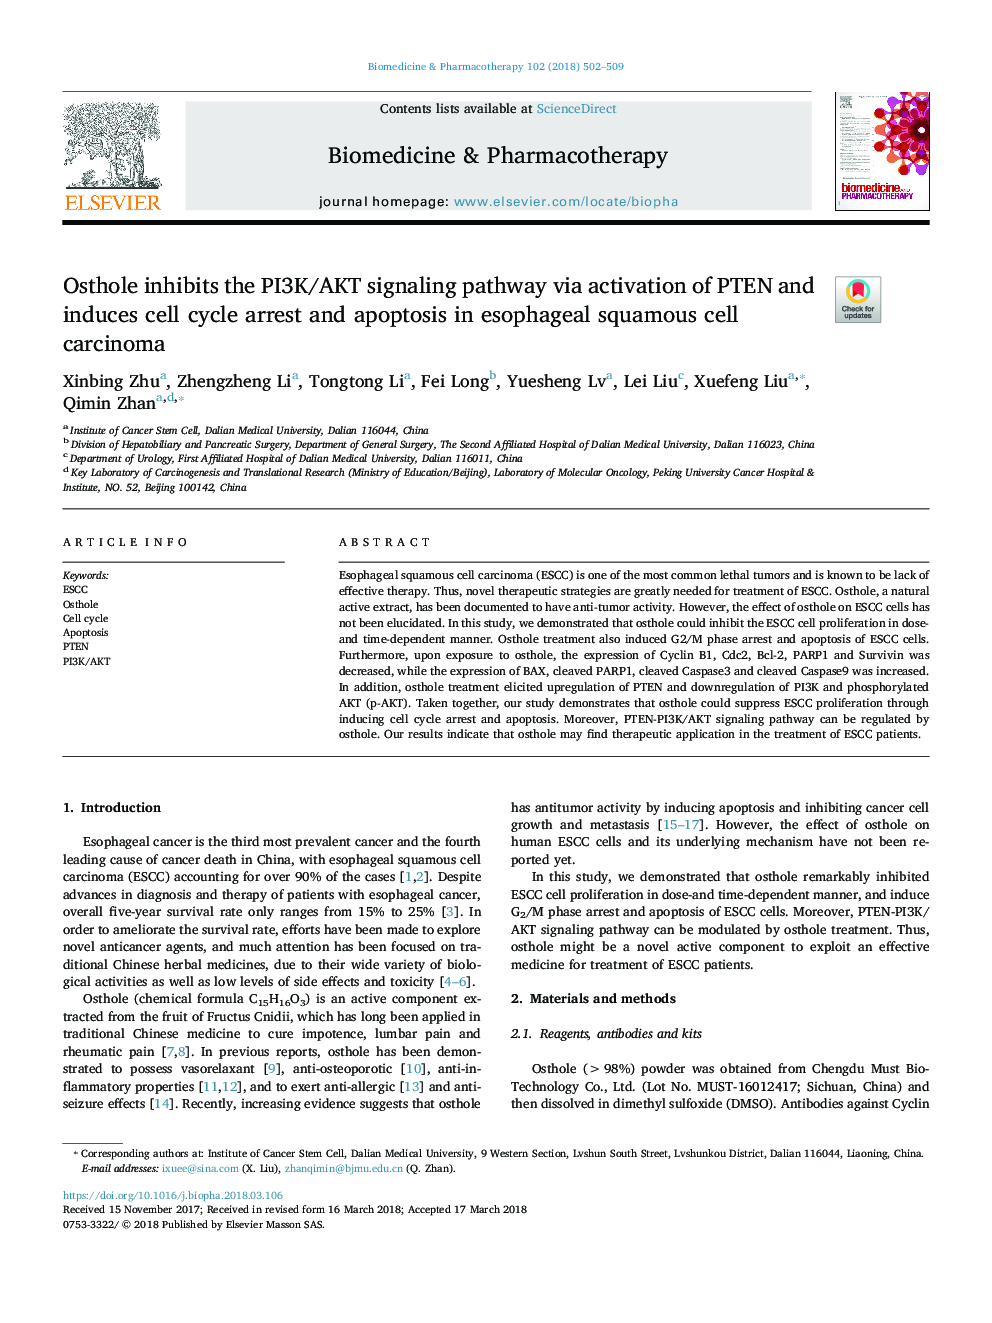 Osthole inhibits the PI3K/AKT signaling pathway via activation of PTEN and induces cell cycle arrest and apoptosis in esophageal squamous cell carcinoma